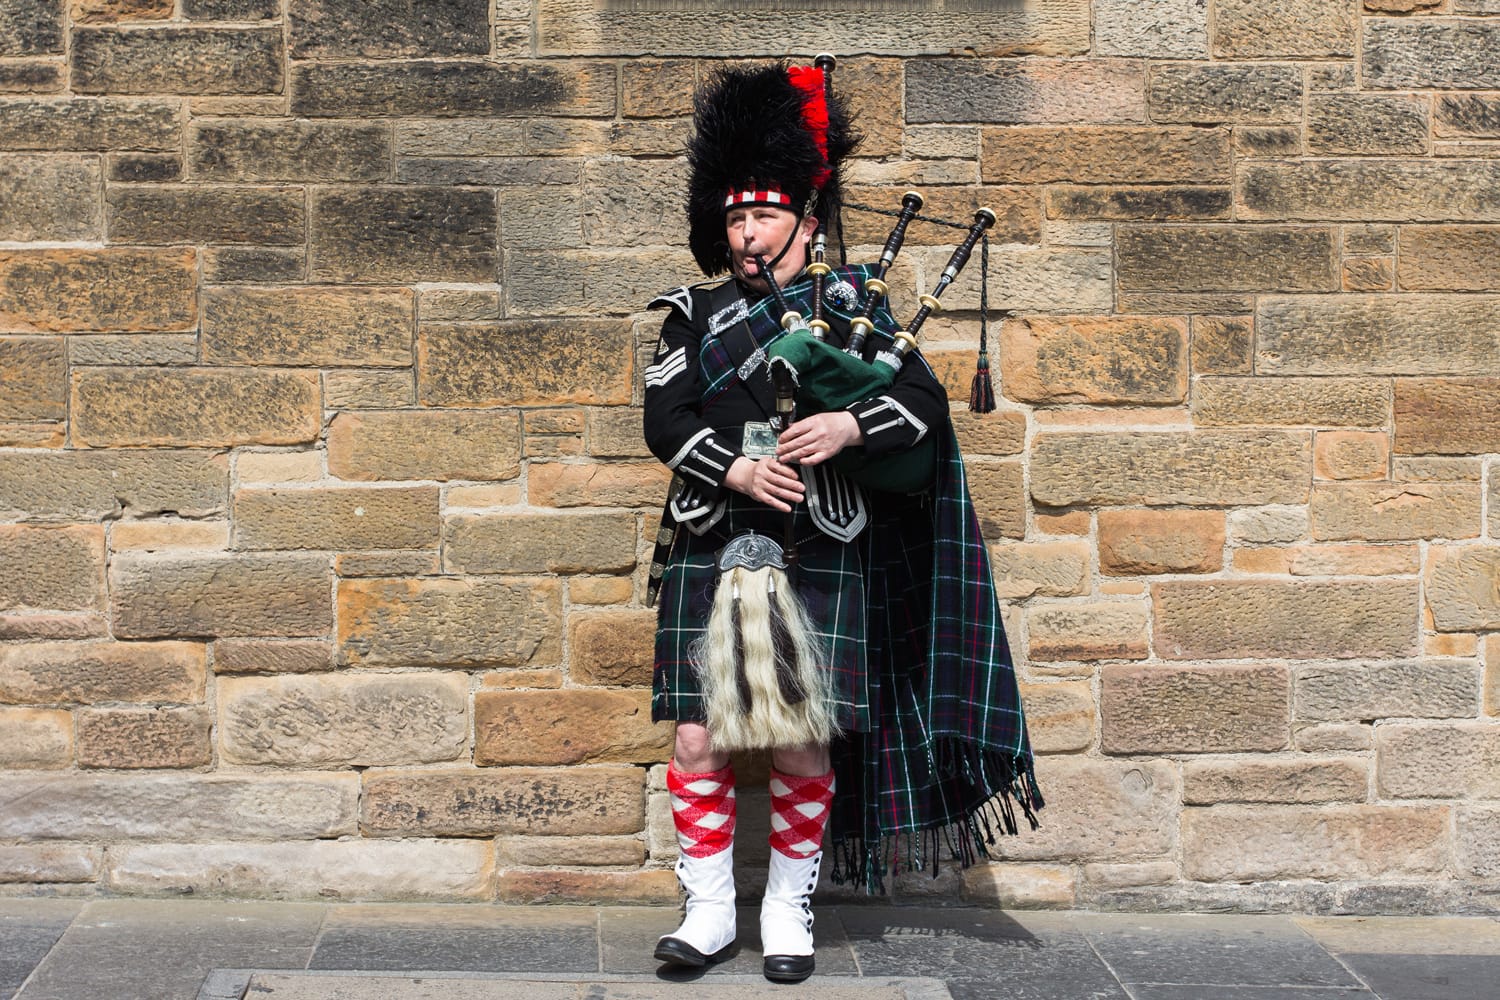 A bagpiper, a street musician wearing kilt and traditional scottish costume